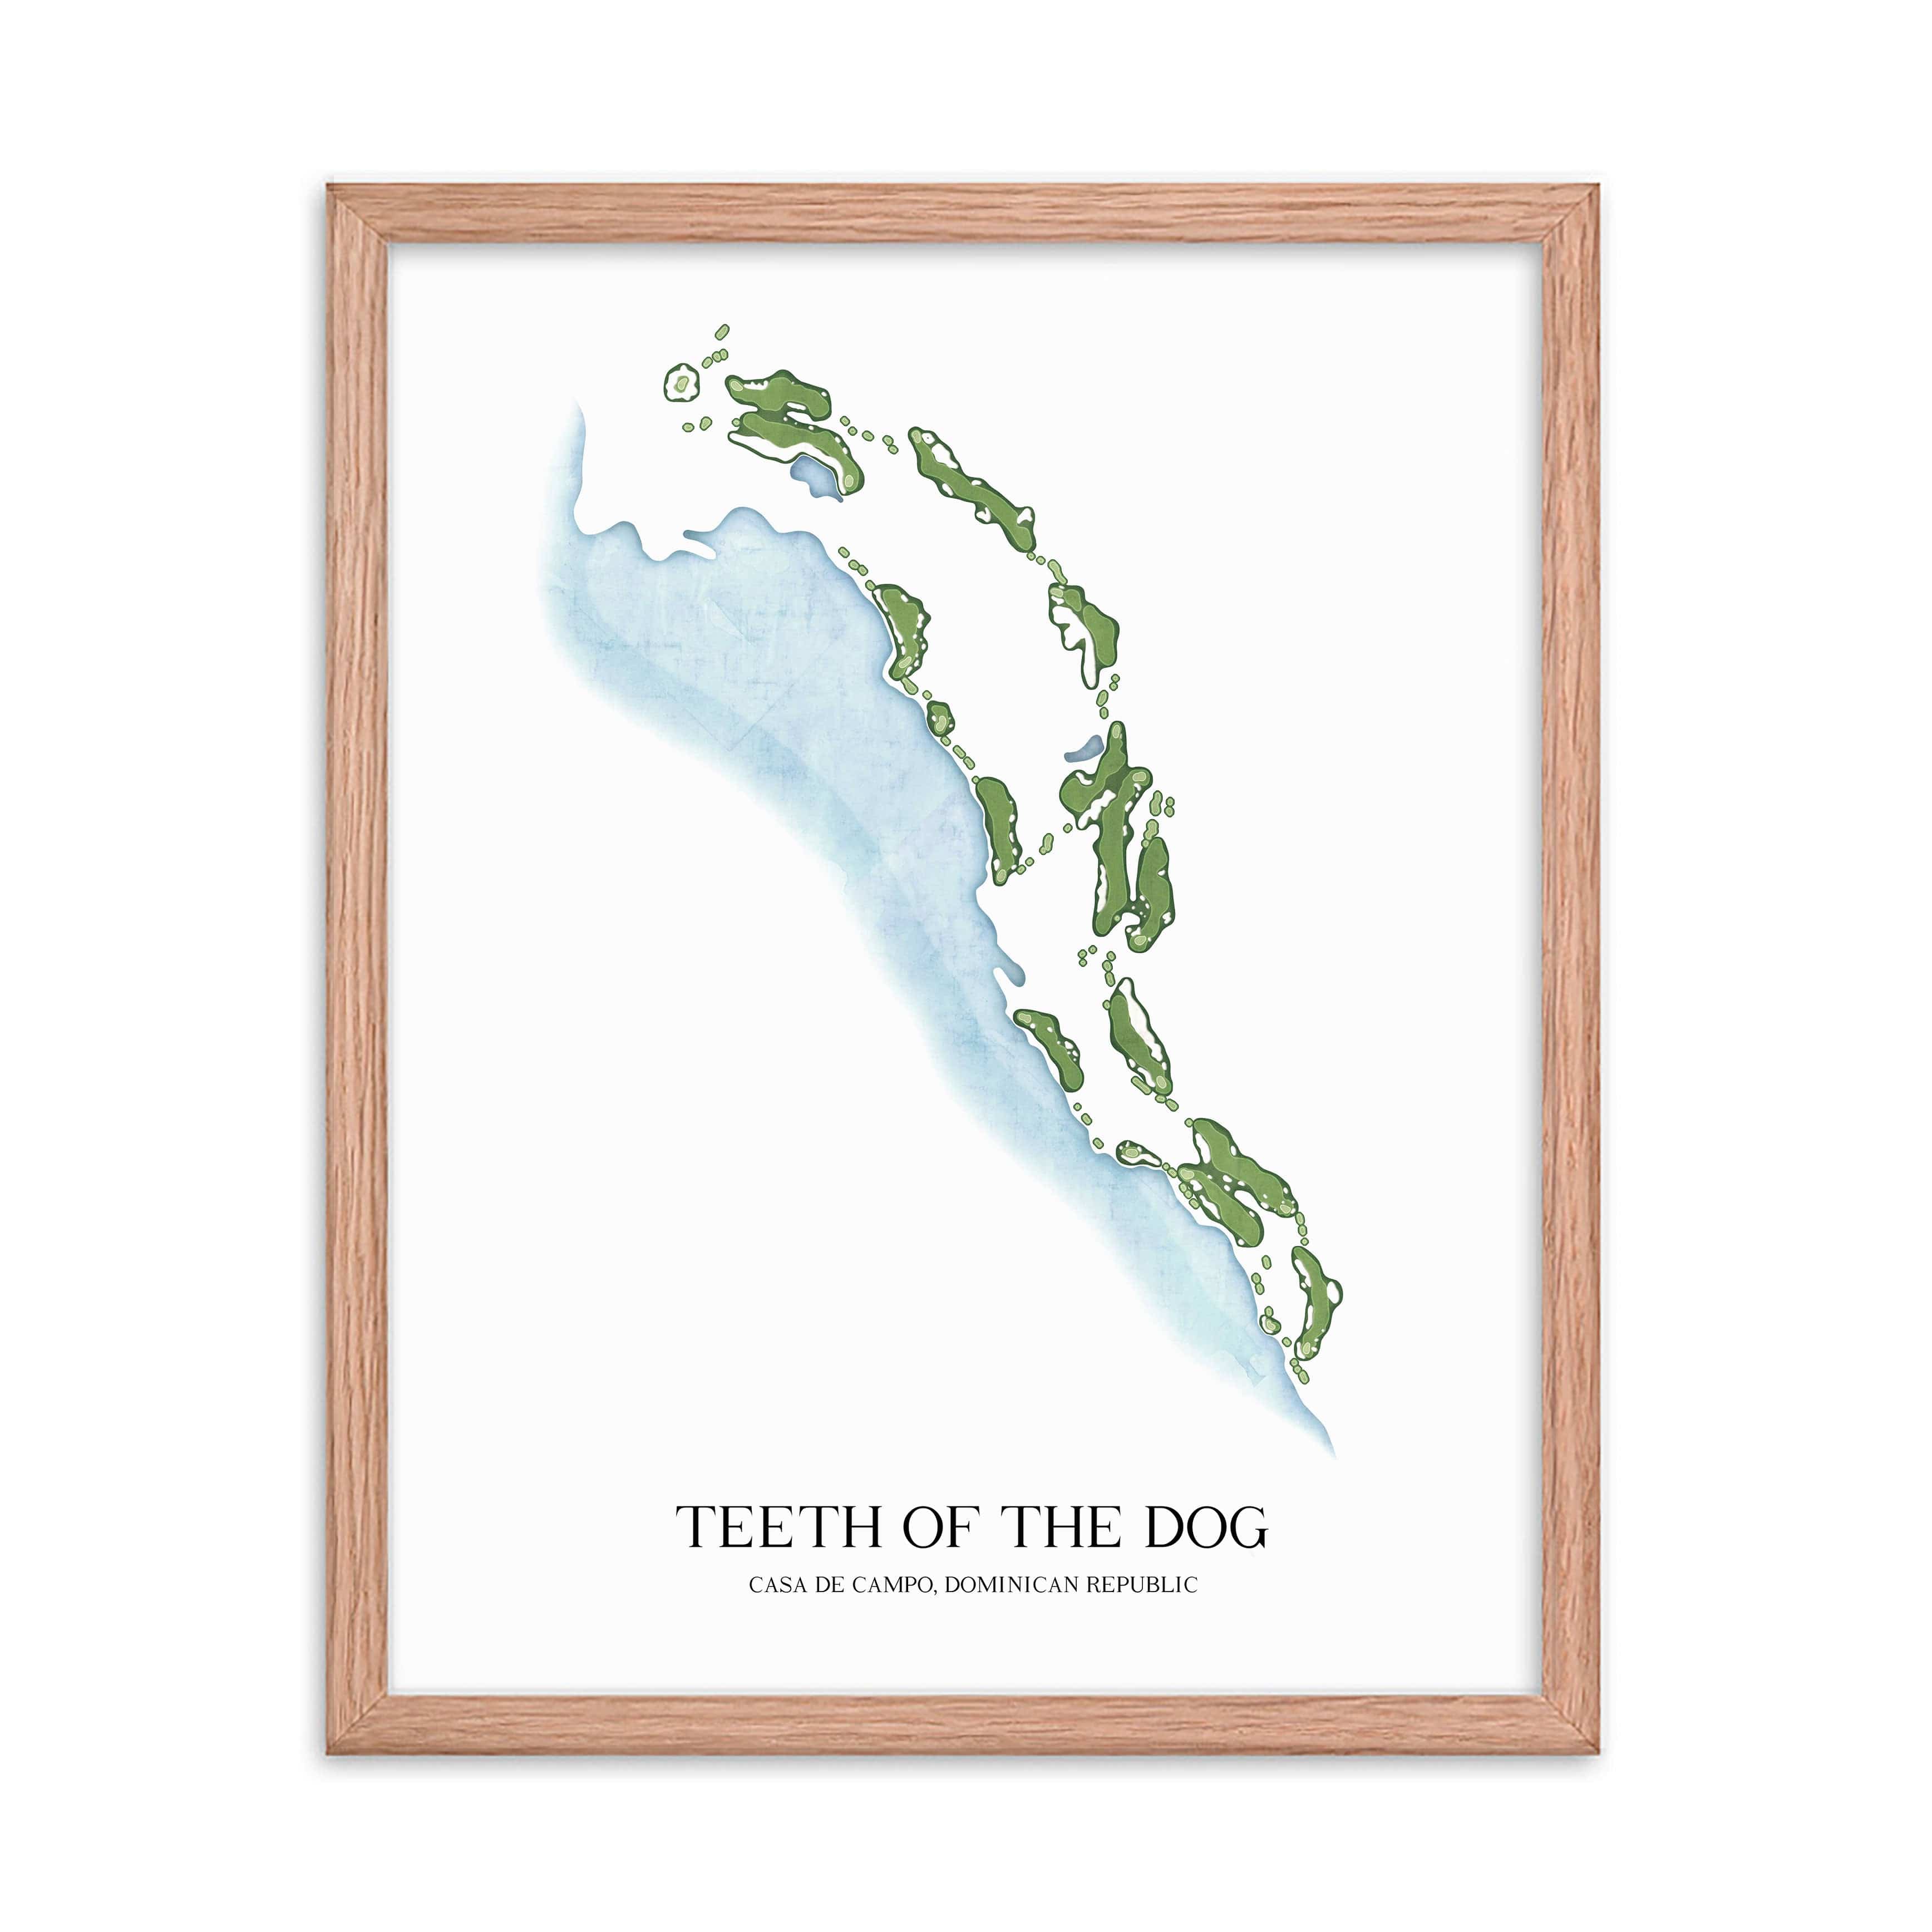 The 19th Hole Golf Shop - Golf Course Prints -  Teeth of the Dog Golf Course Map